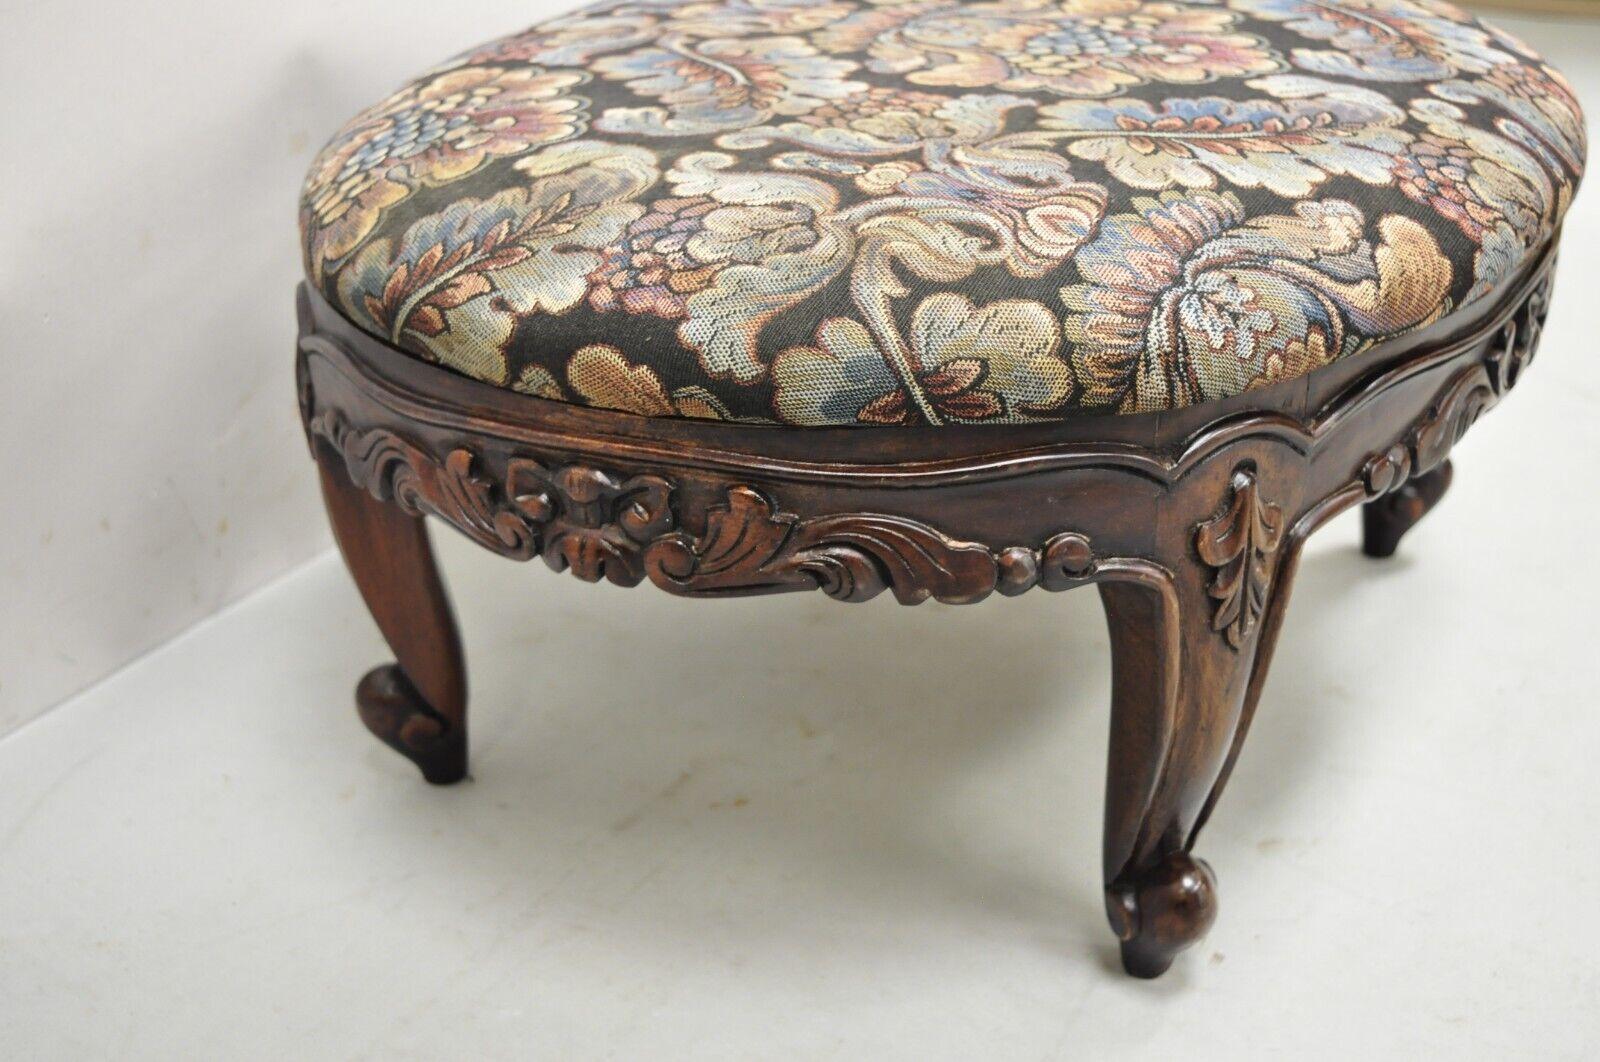 20th Century French Louis XV Victorian Style Carved Wood Oval Small Footstool Ottoman